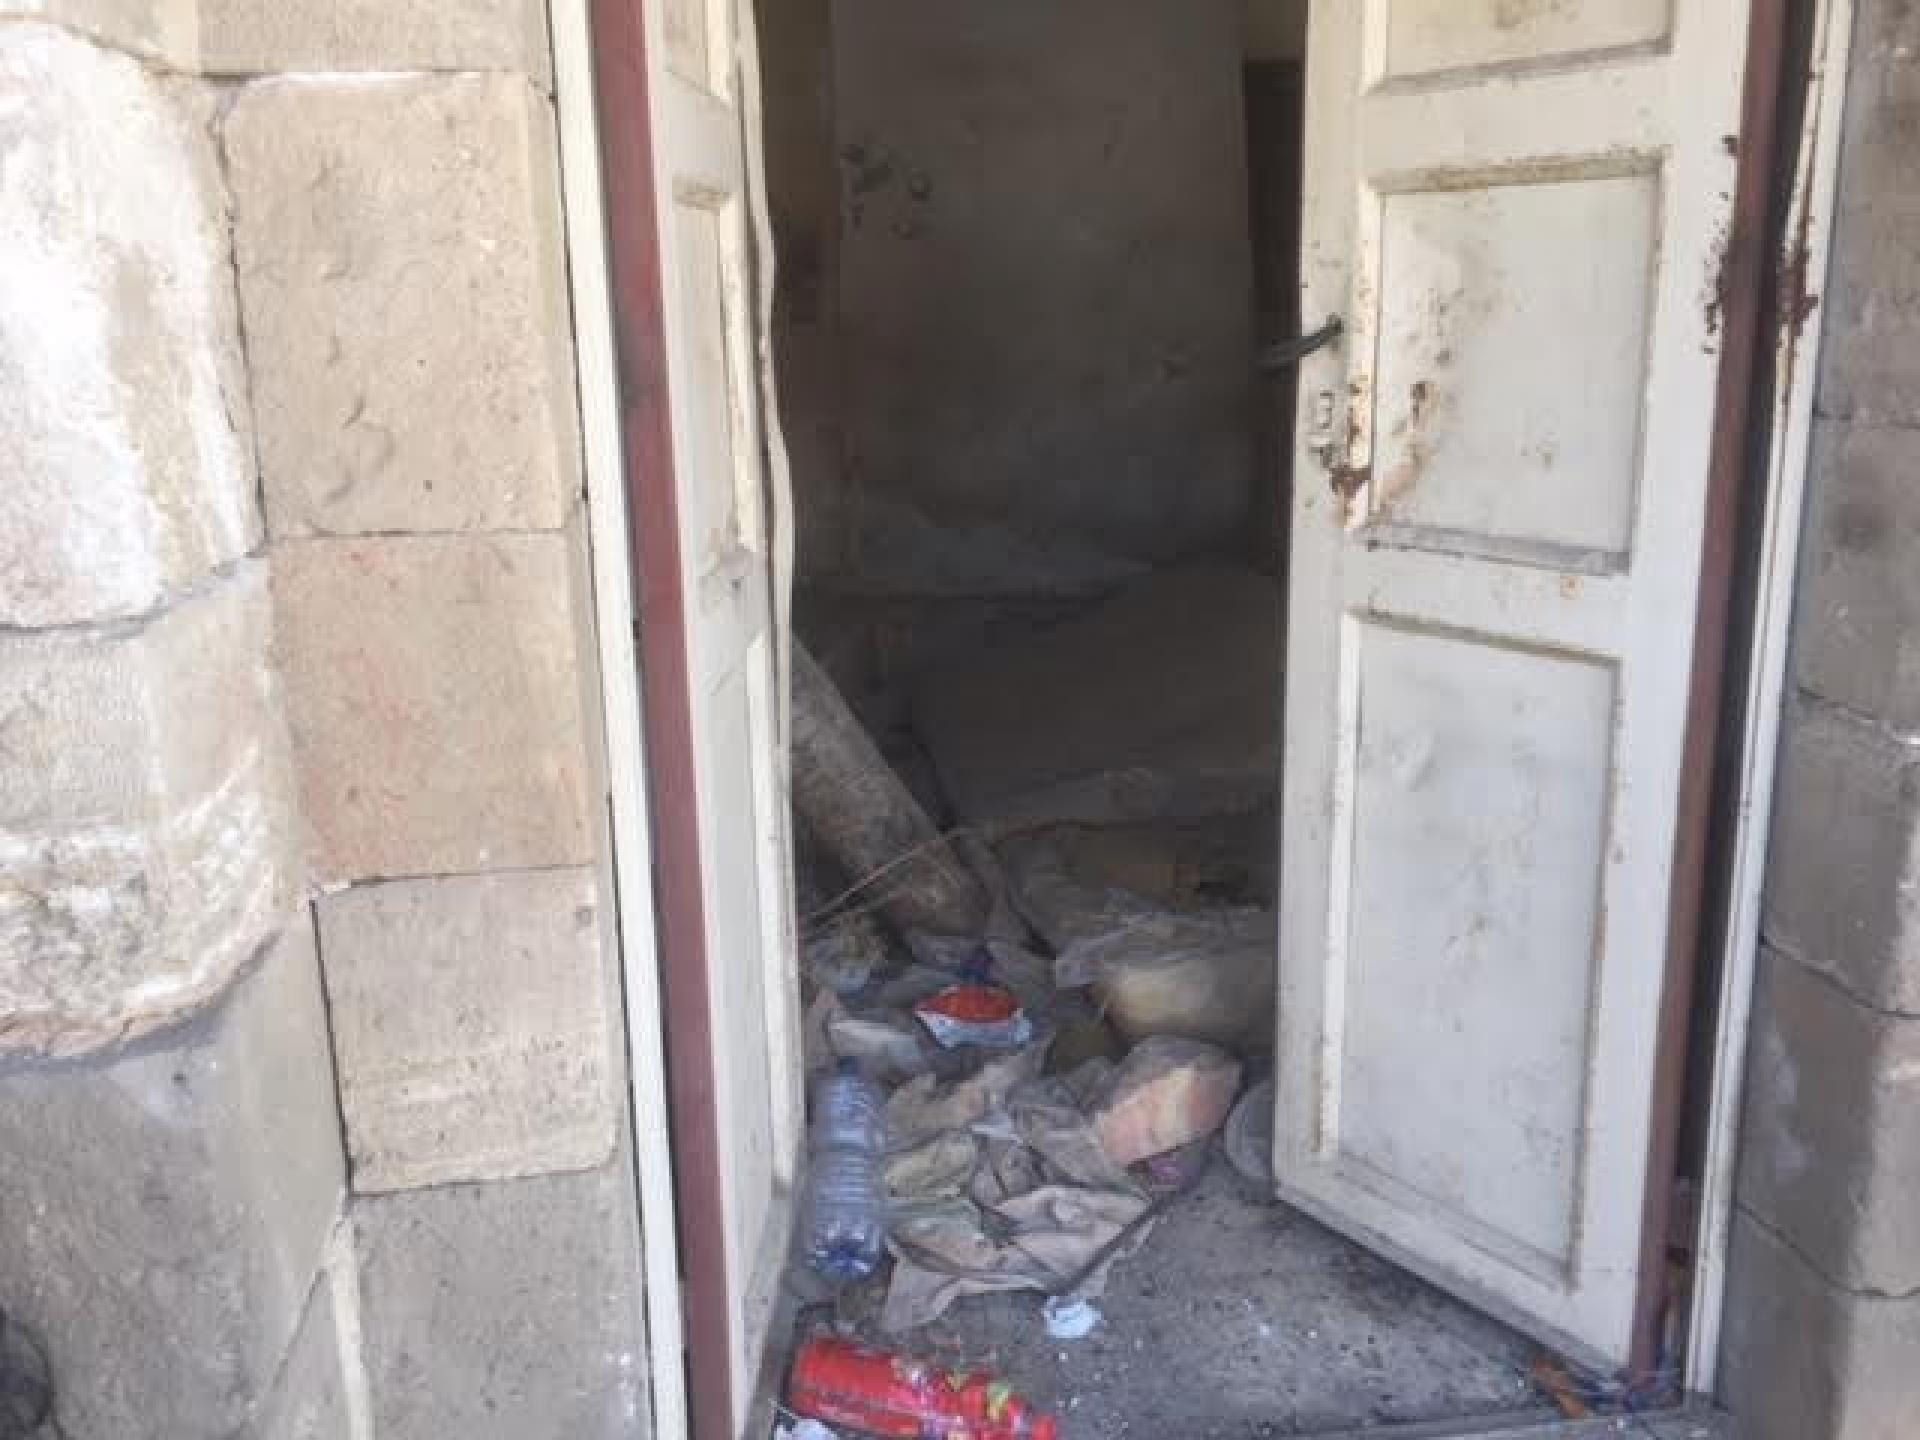 The first house in Shuhada street. The door which had been  welded is open